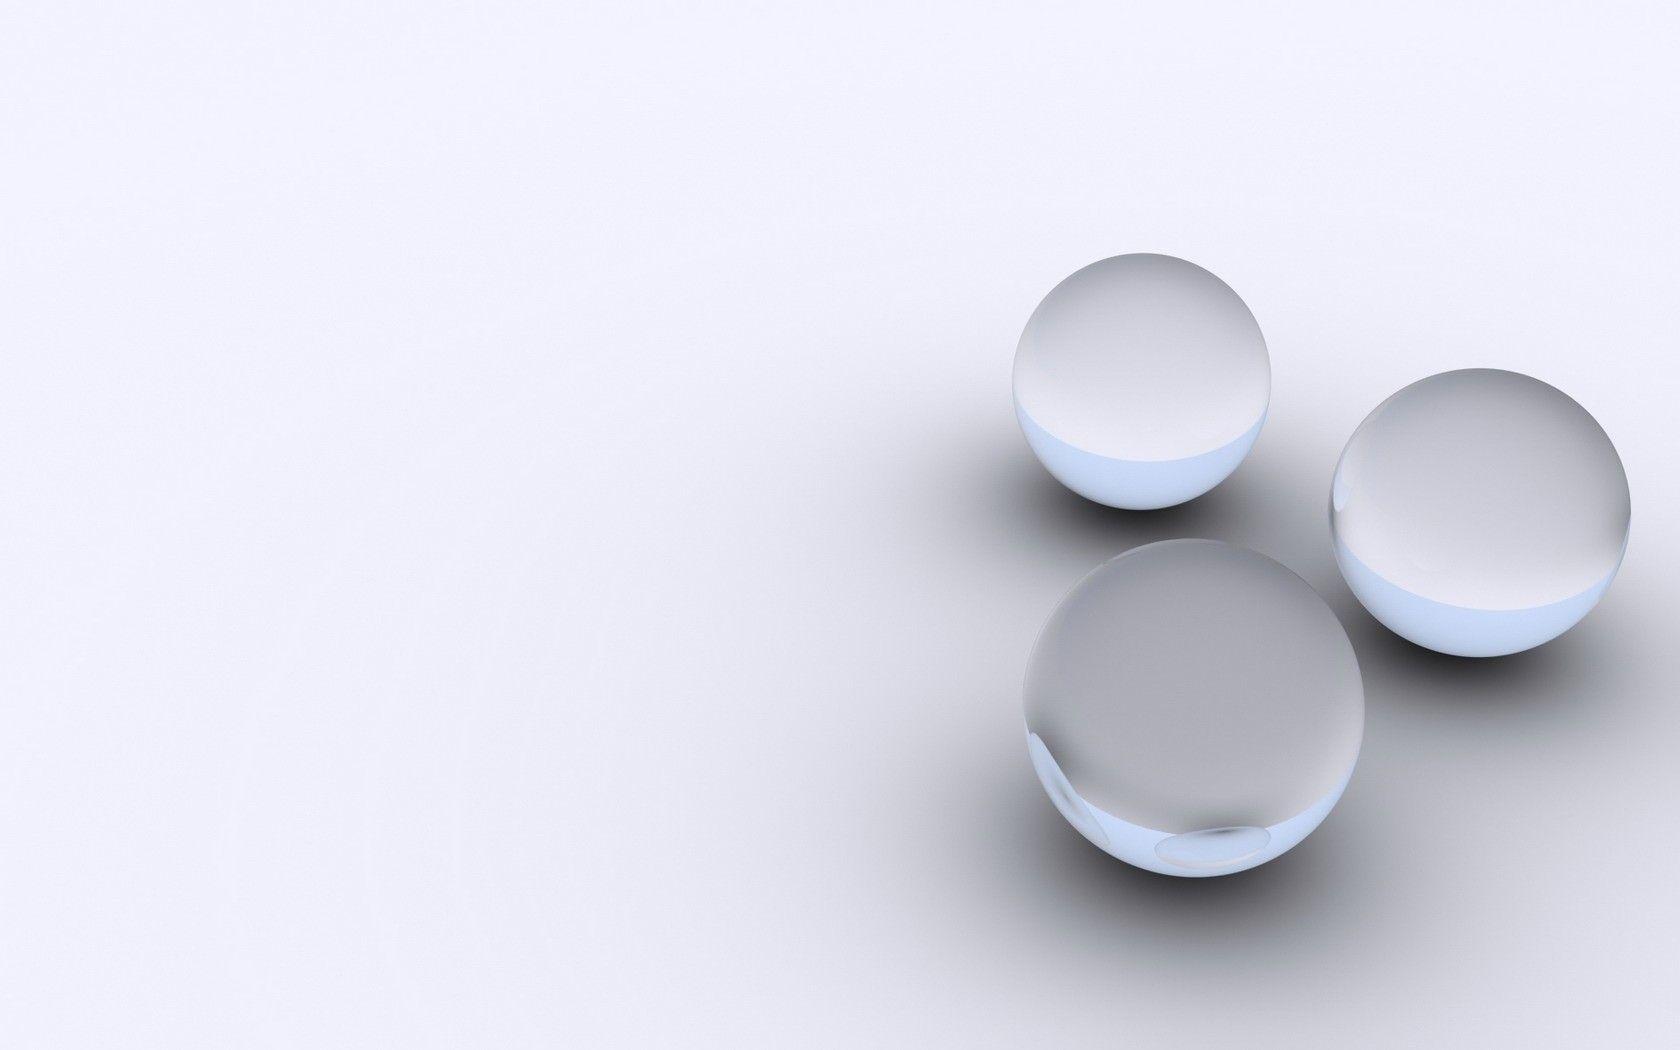 abstract minimalistic white balls silver 1680x1050 wallpaper High